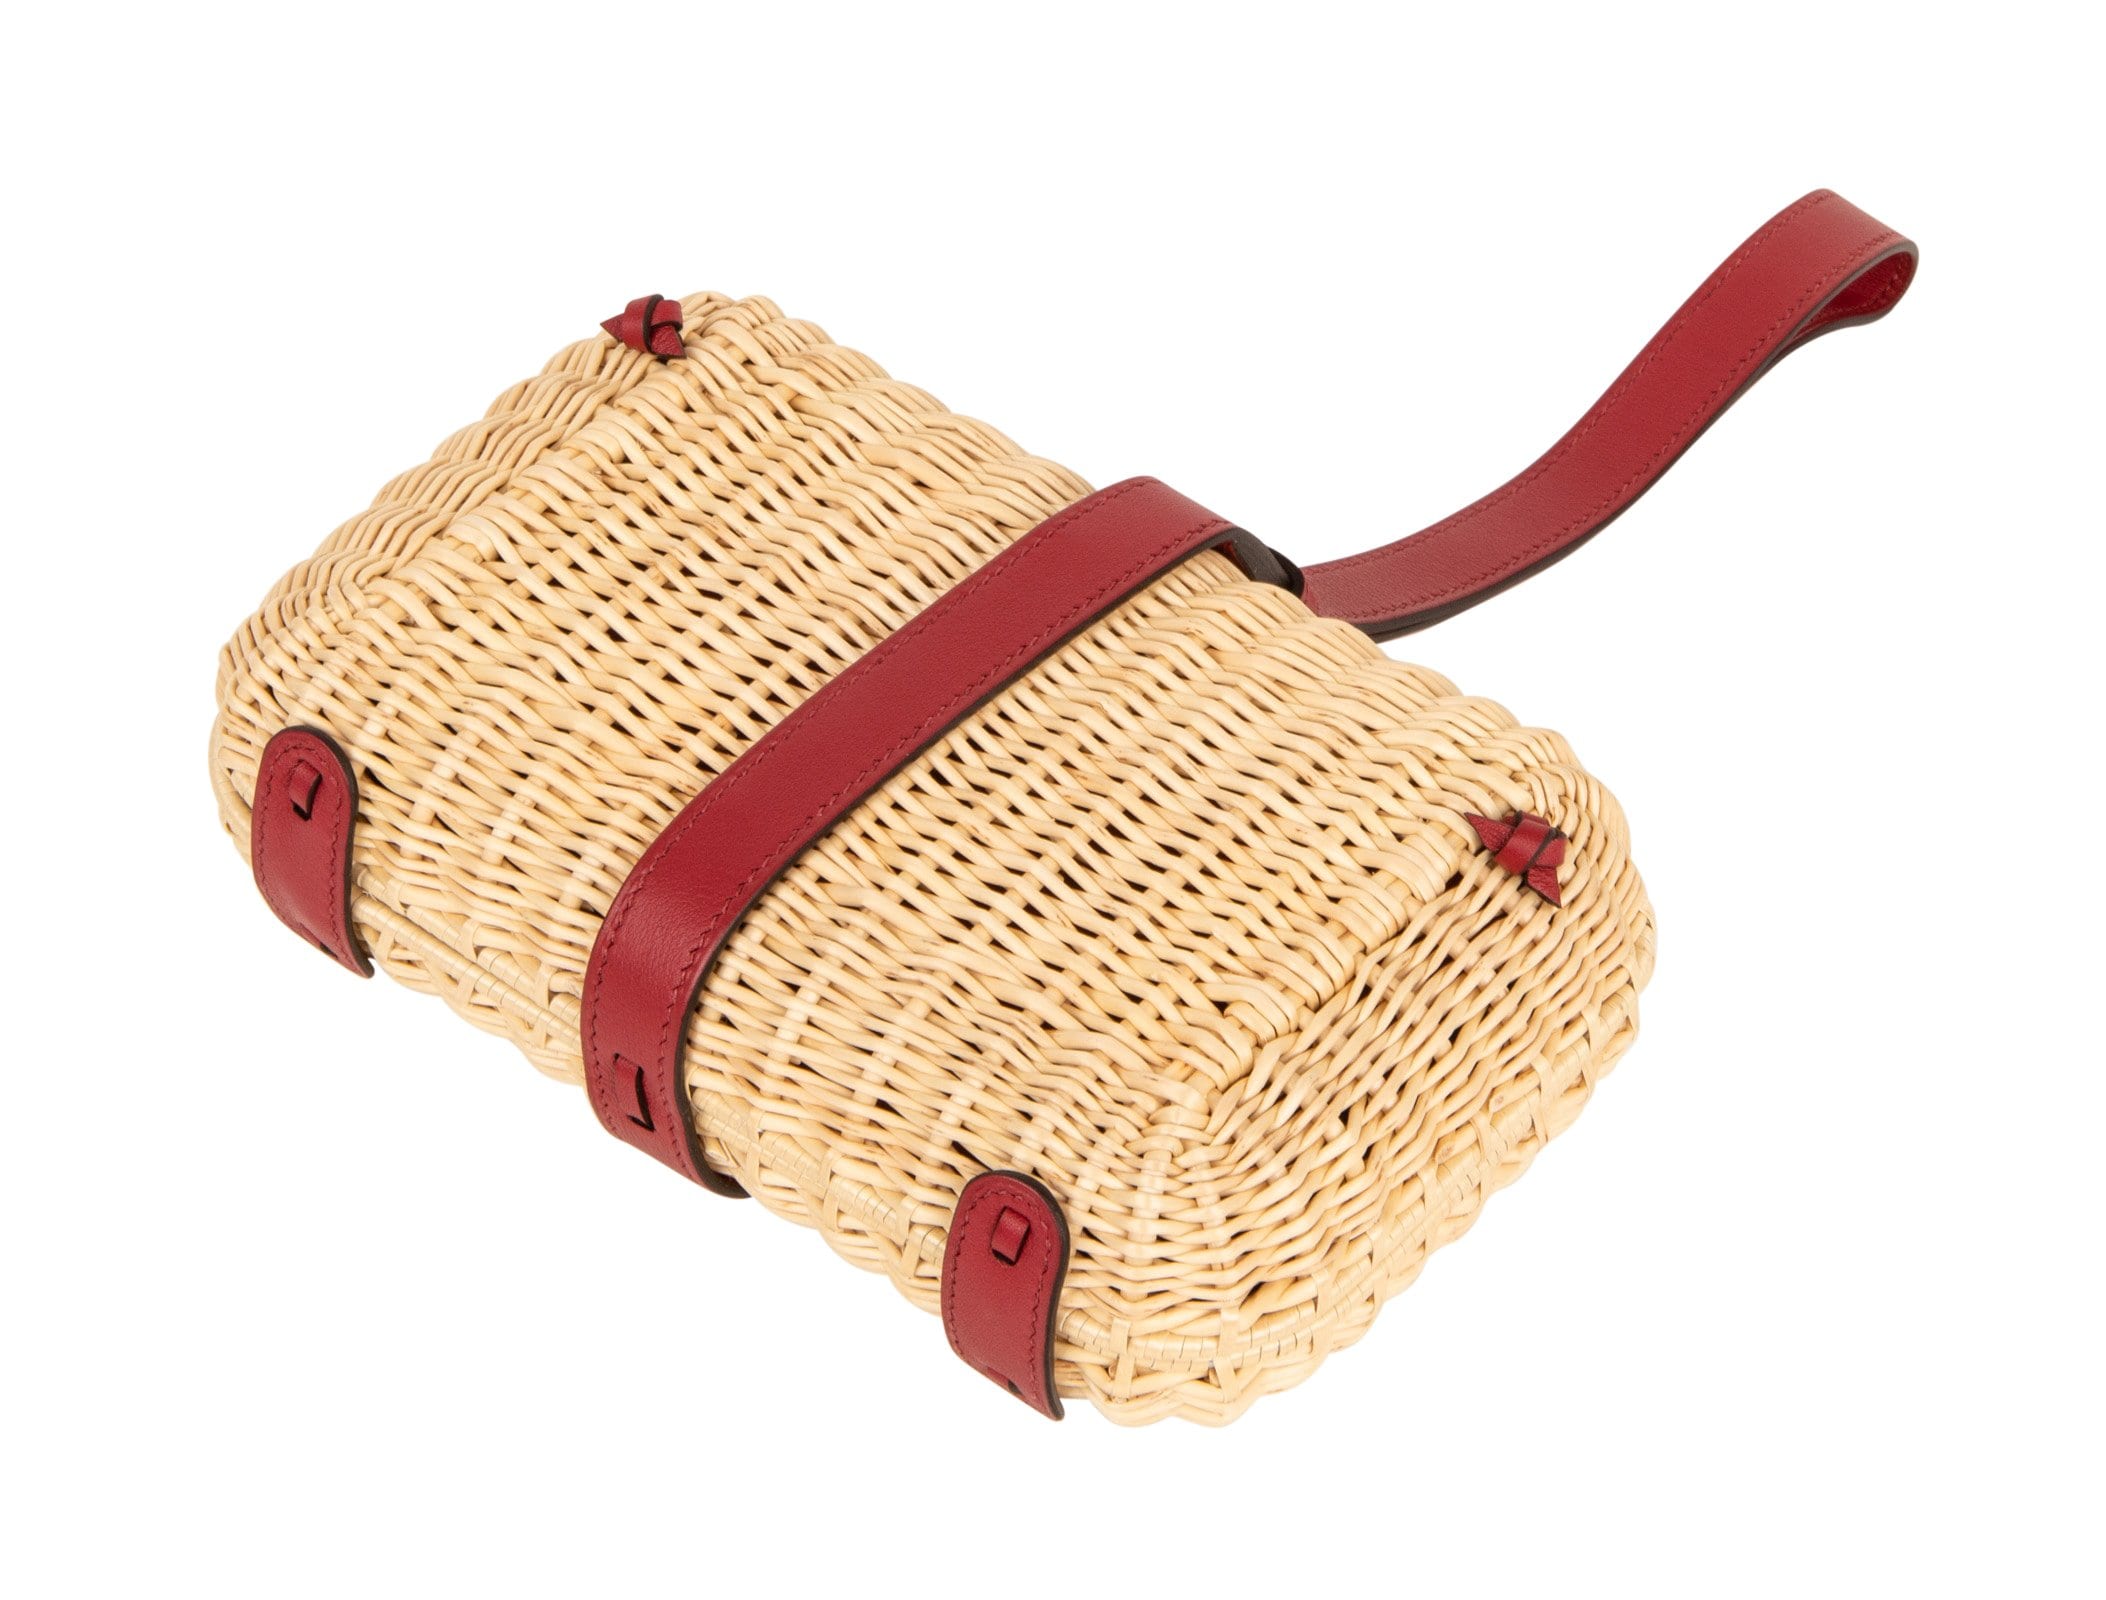 Hermes Bag Picnic Osier Wicker Clutch Rouge H New - mightychic